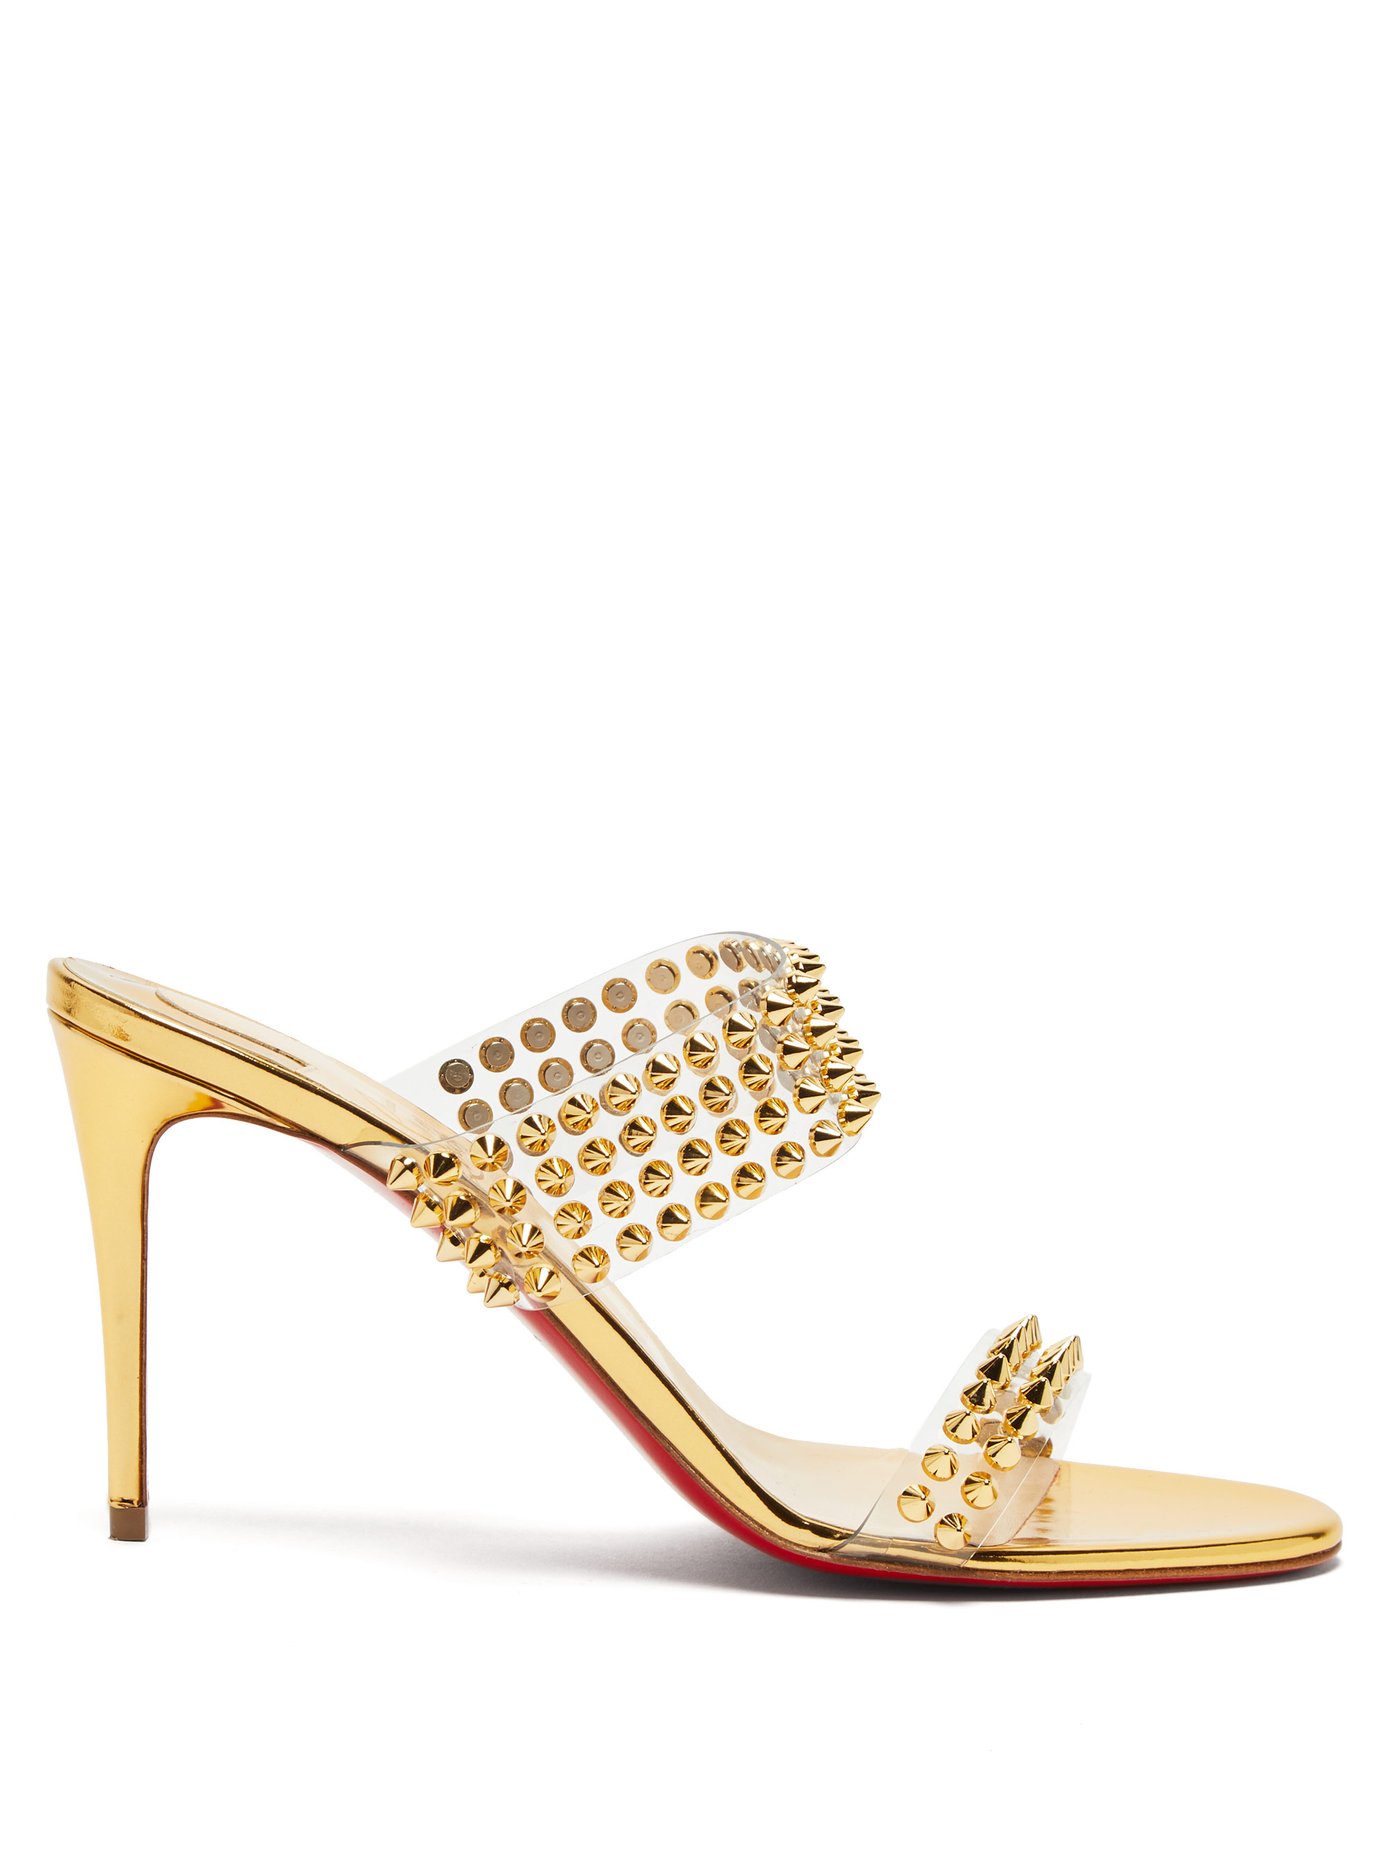 louboutin gold spikes